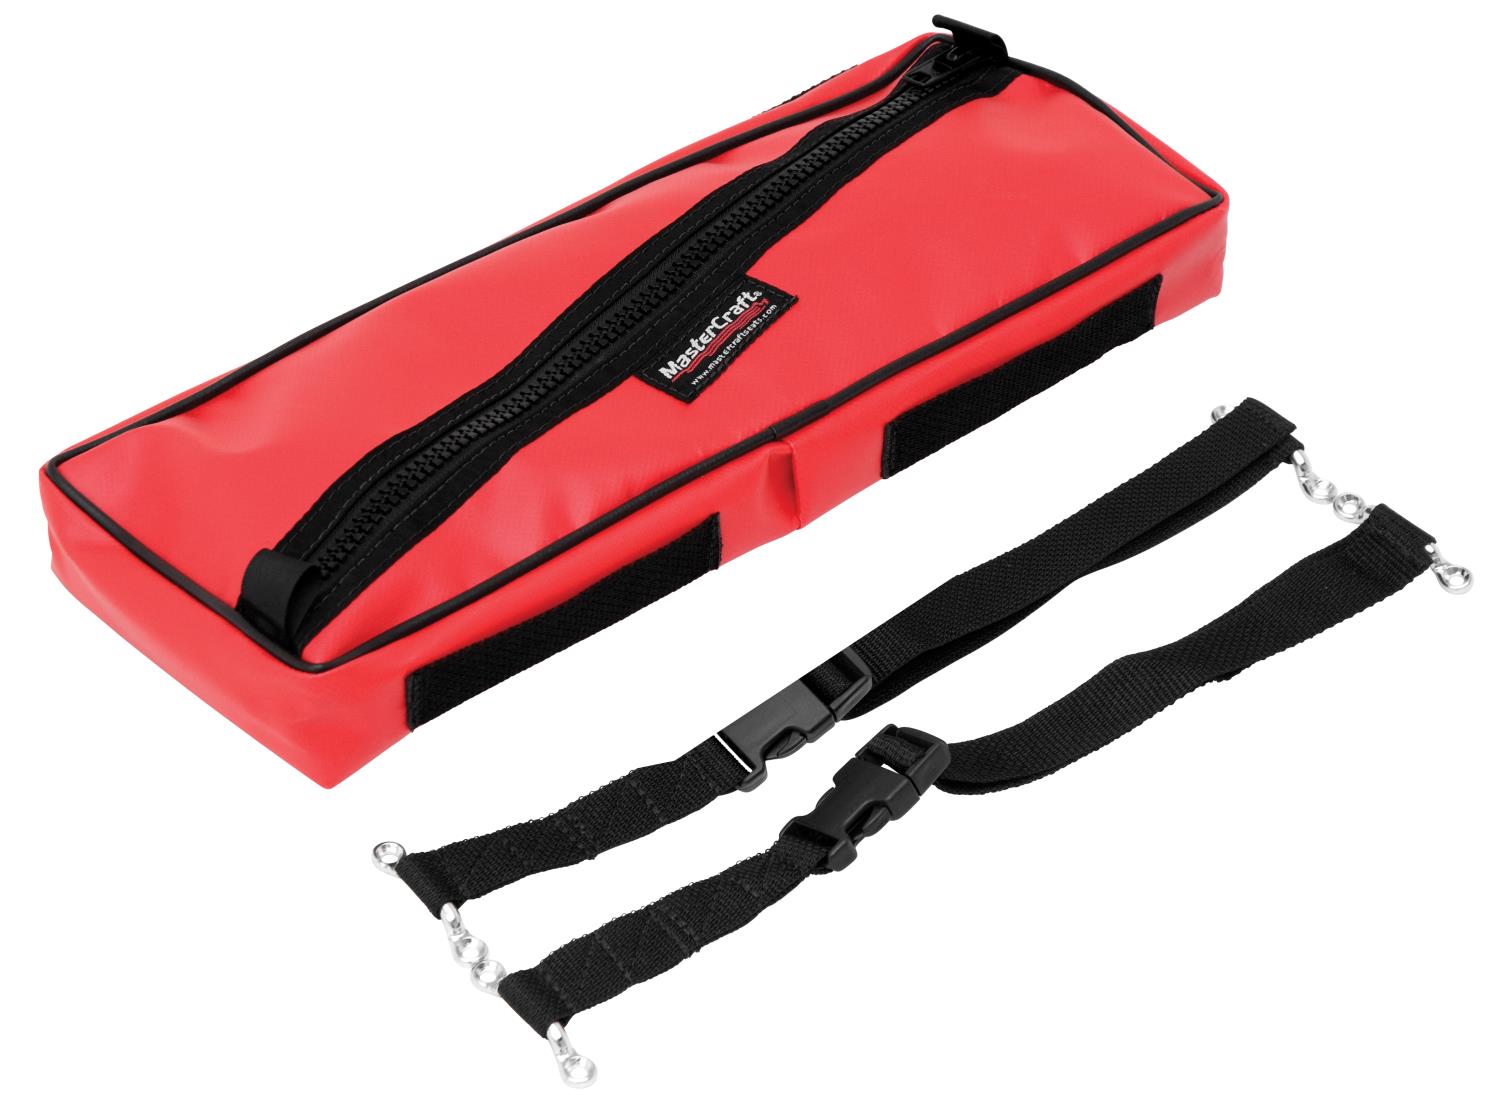 640105 Tool Tote, Regular, 17 x 6 x 2 1/2 with 2 bag straps, Red